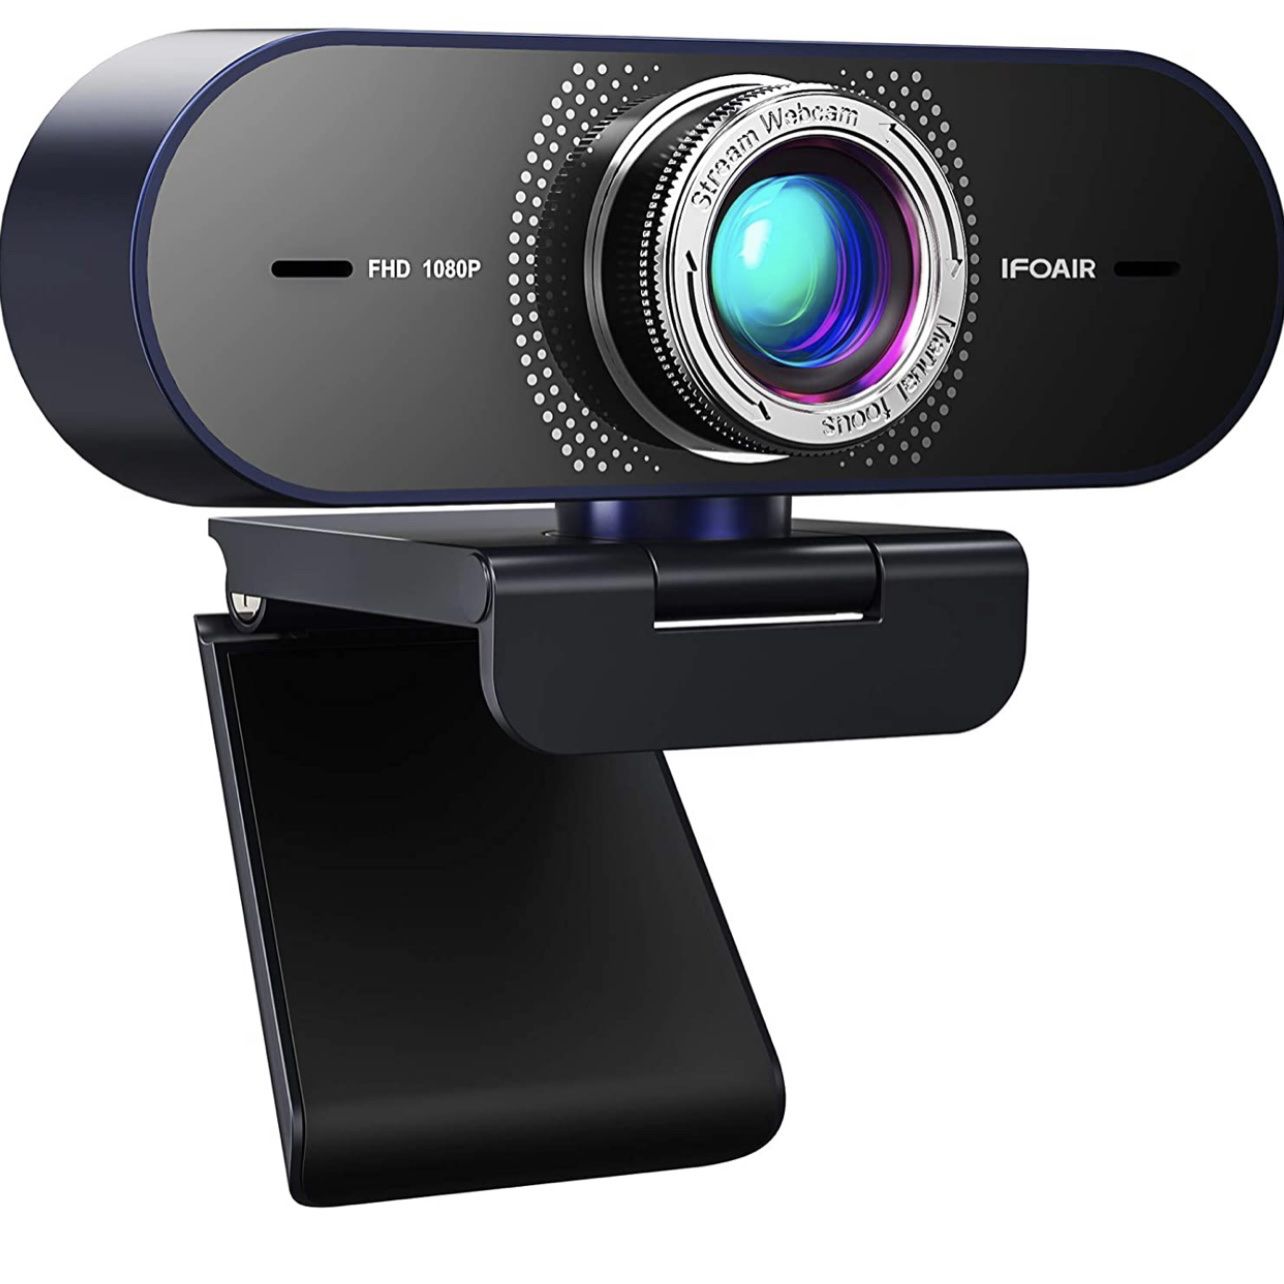 Streaming Webcam with Microphone for Desktop - HD 1080P Webcam with 110° Wide View, Exposure Correction, Plug & Play, Web Camera for Computers, Gaming